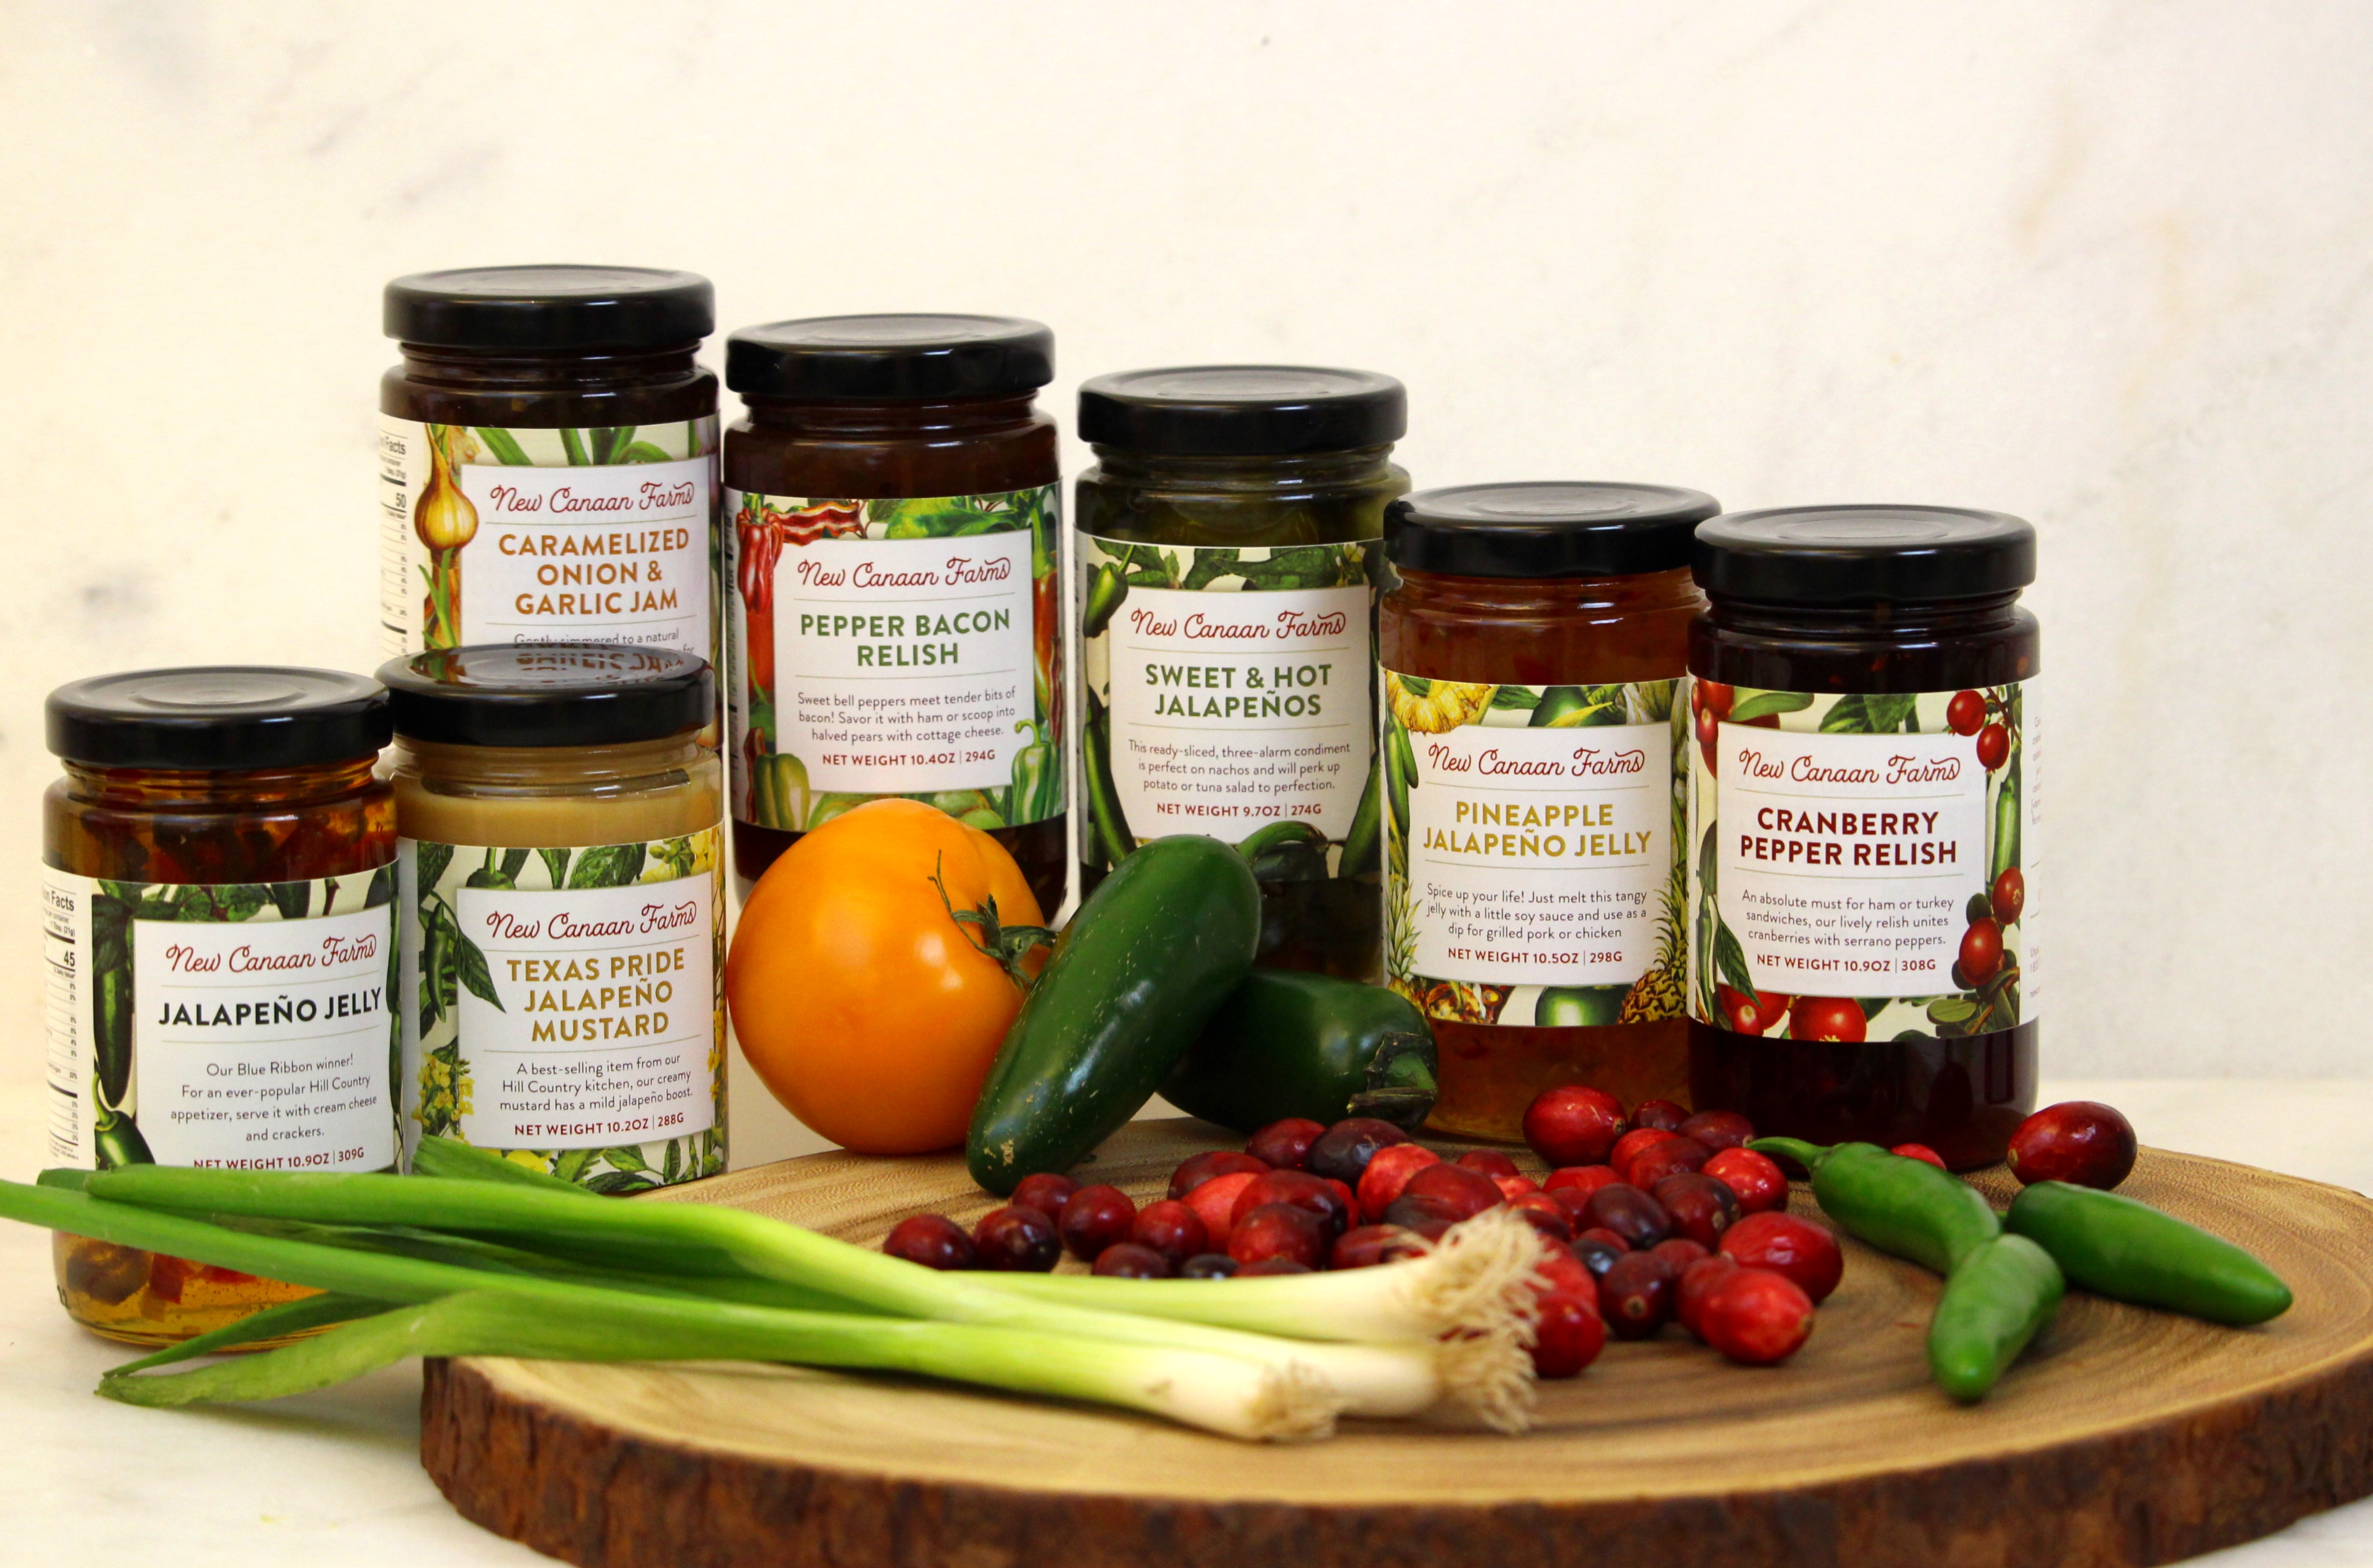 Seven New Canaan Farms savory jams and relishes with beautiful new product labels